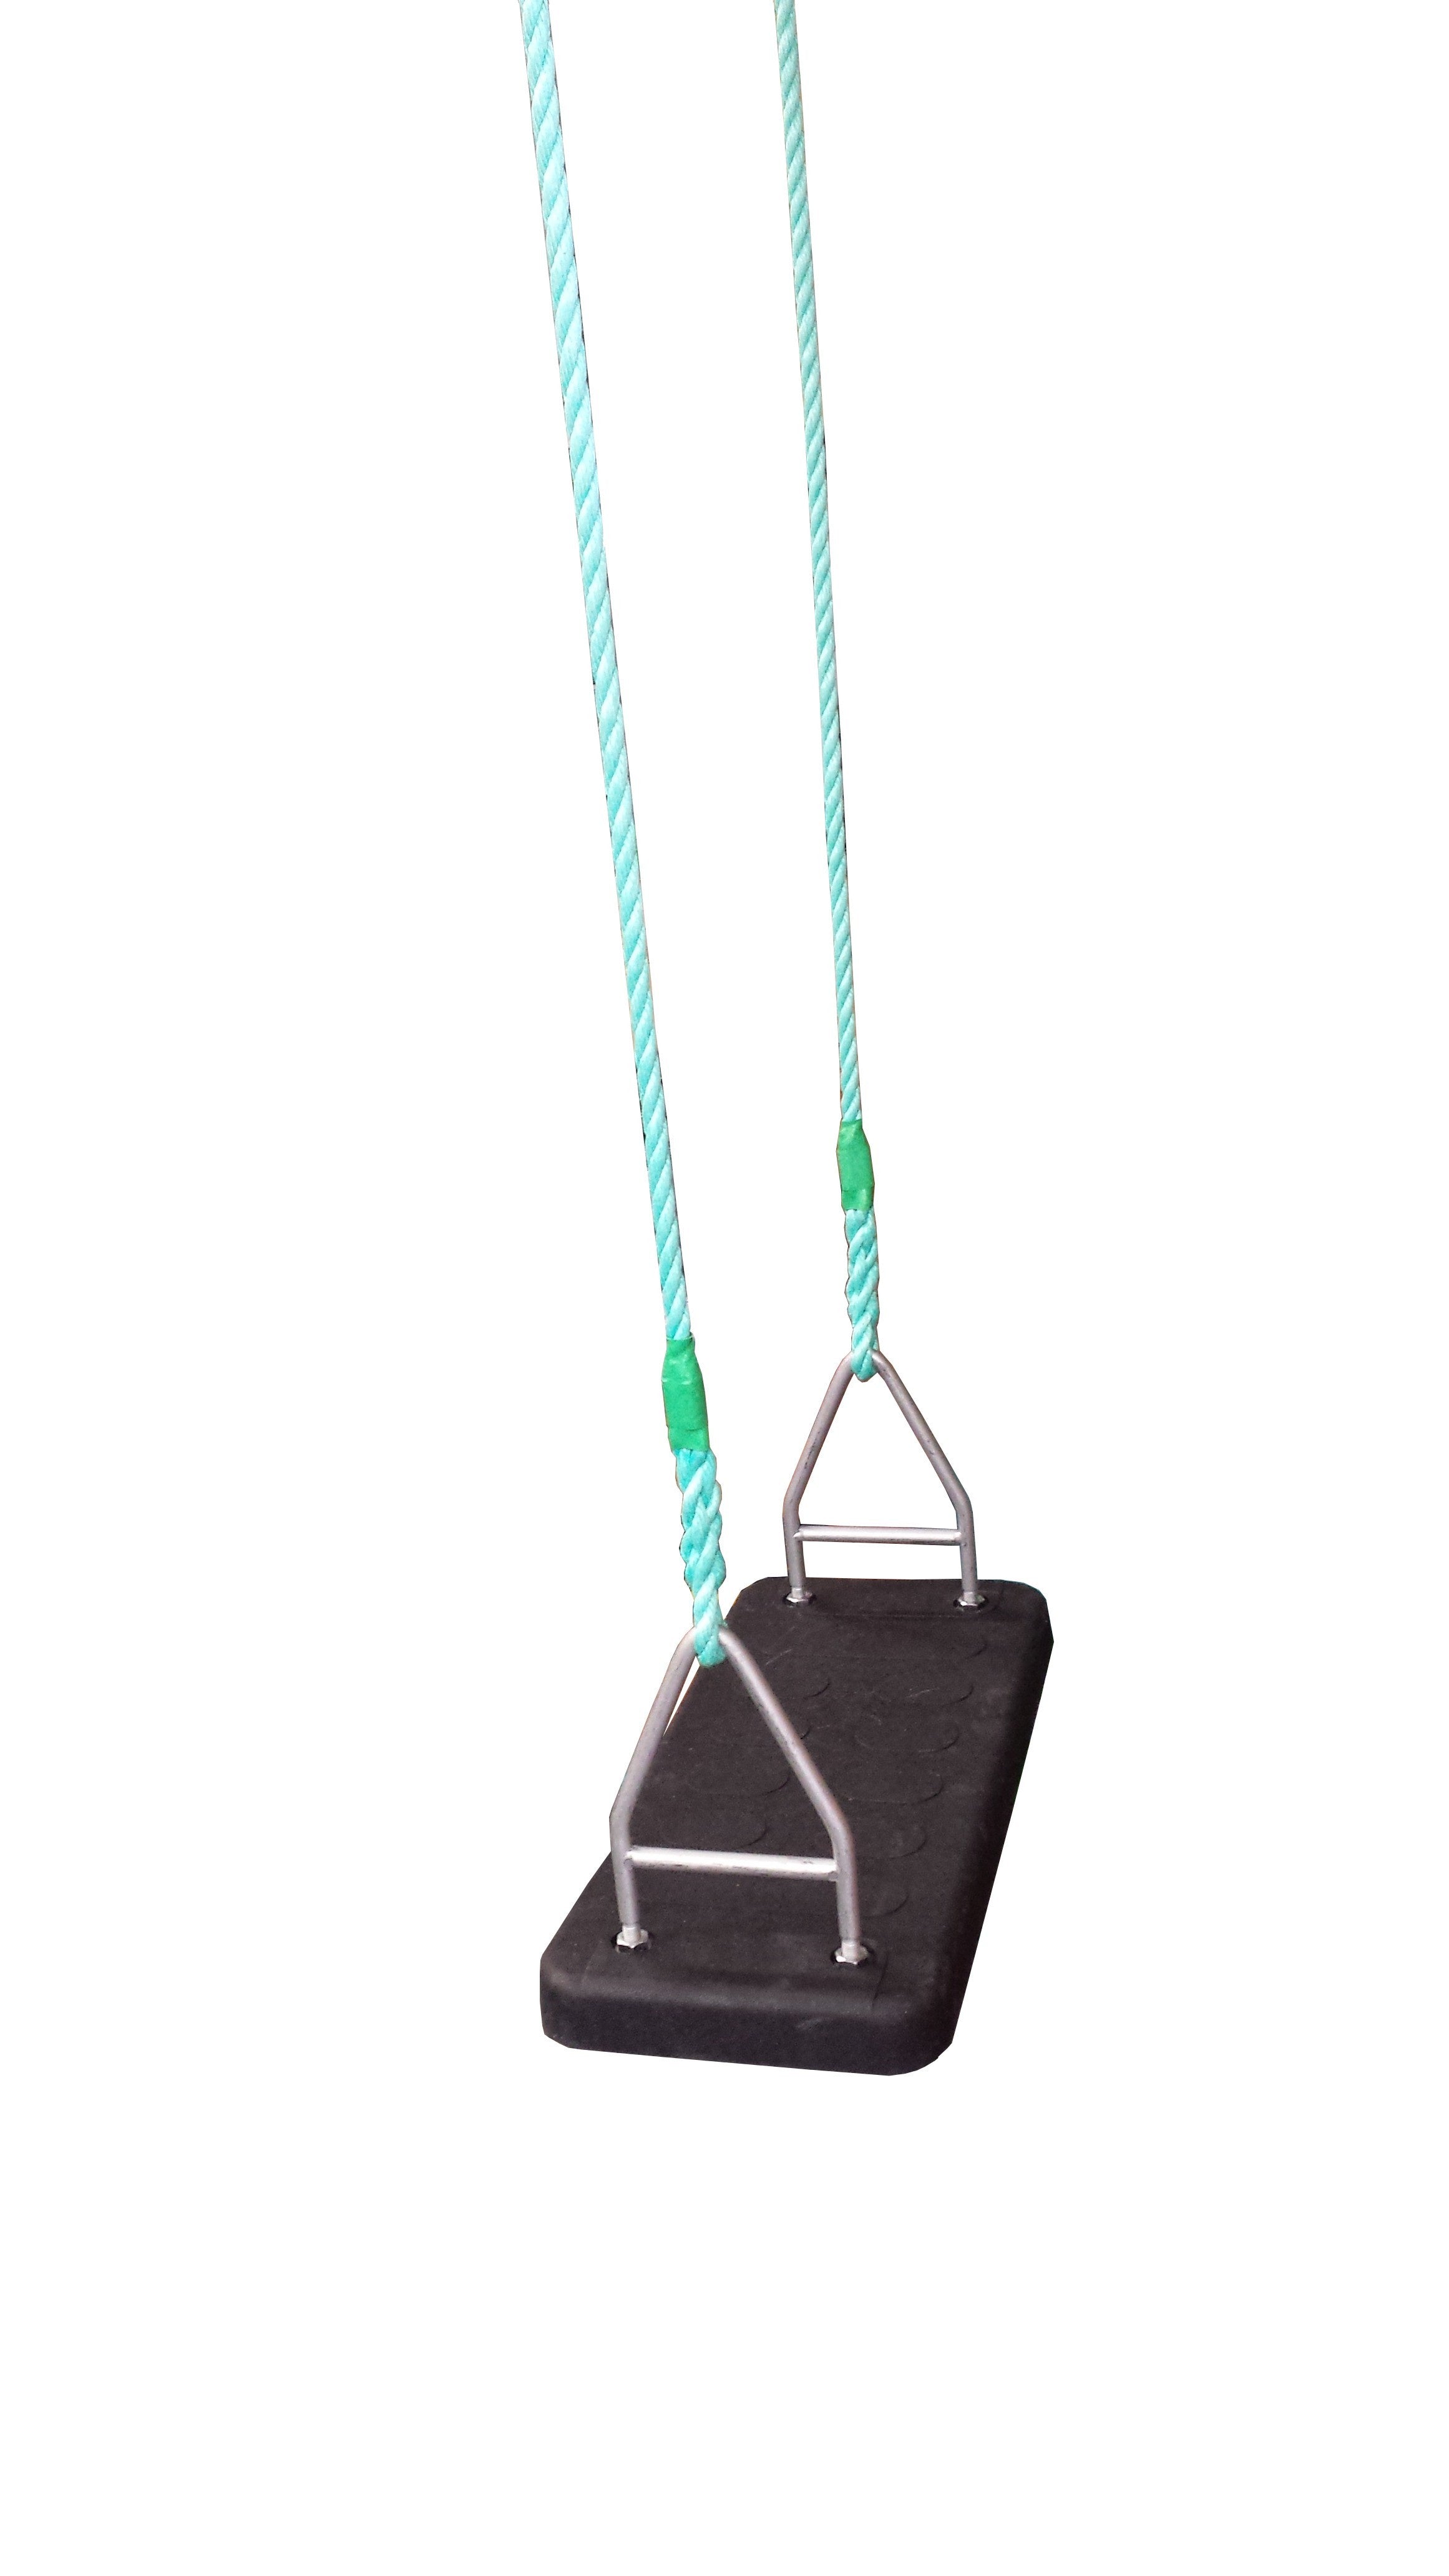 Outdoor Play Equipment - Senior Safety Swing